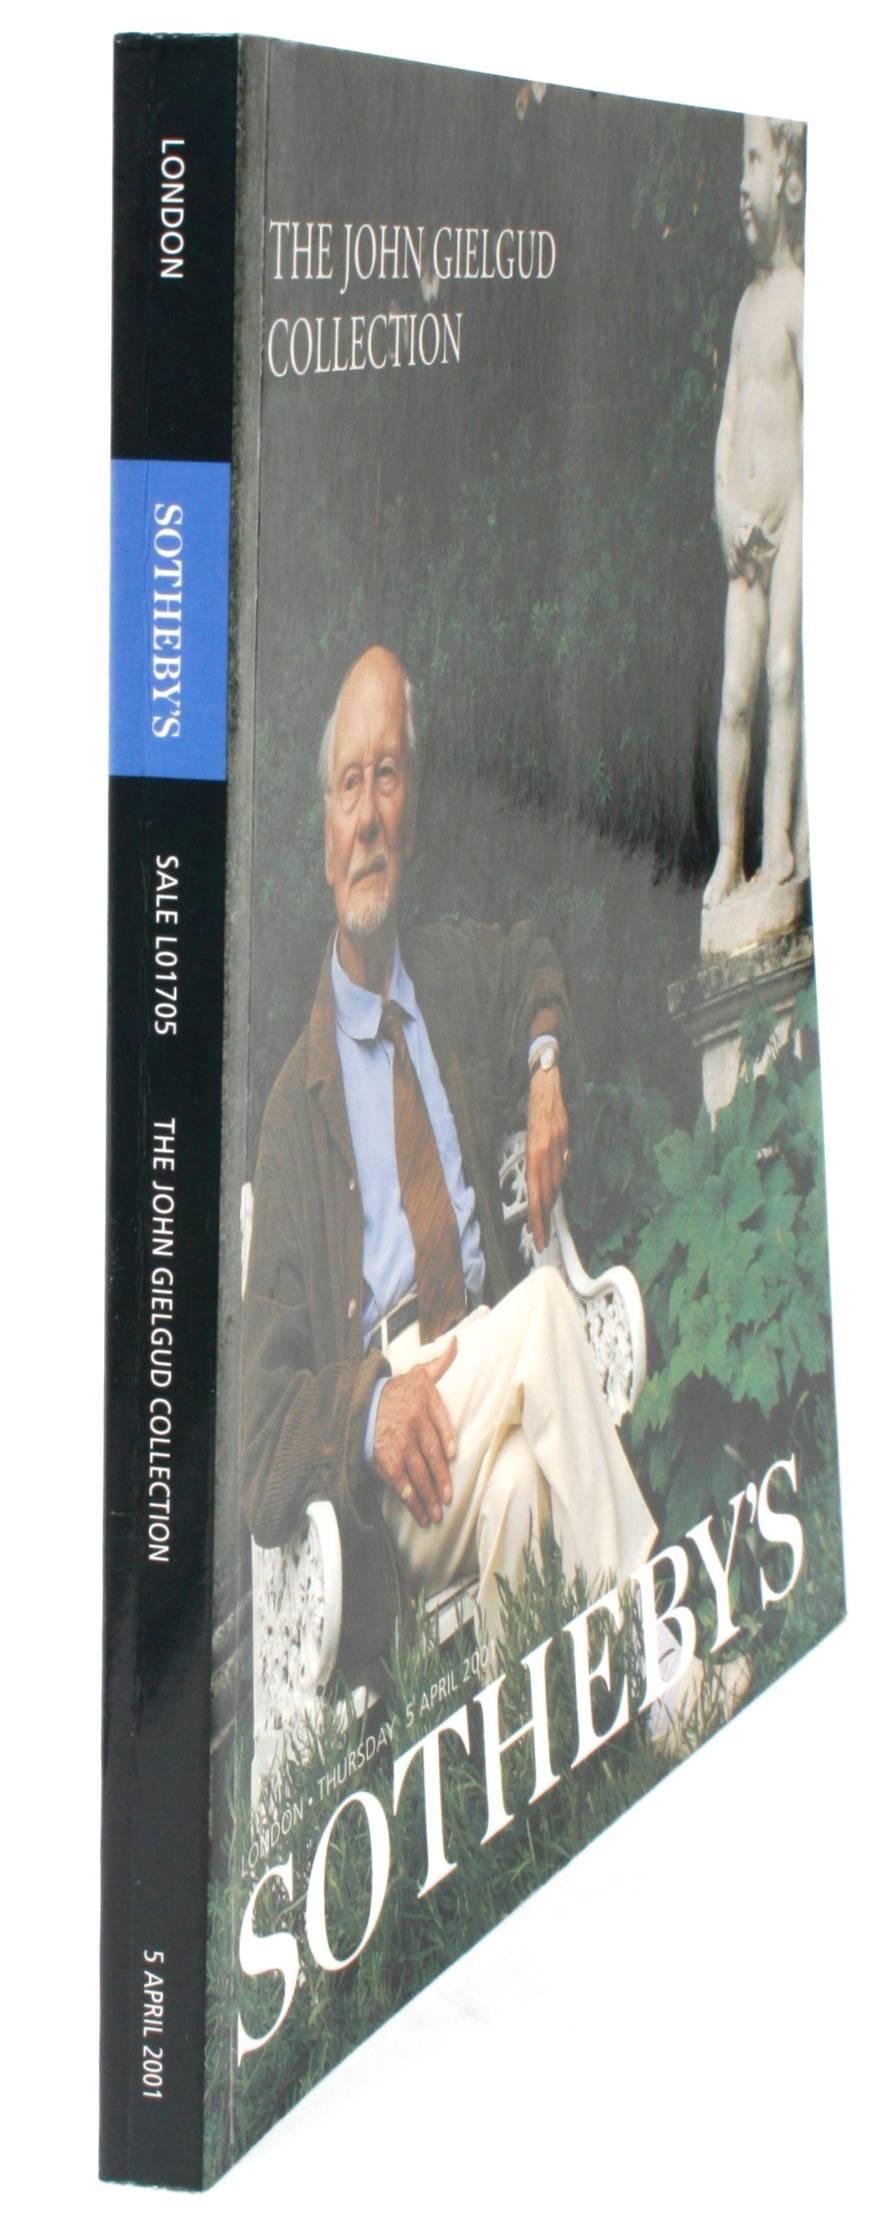 Sotheby's London; The John Gielgud Collection, 2001 For Sale 13